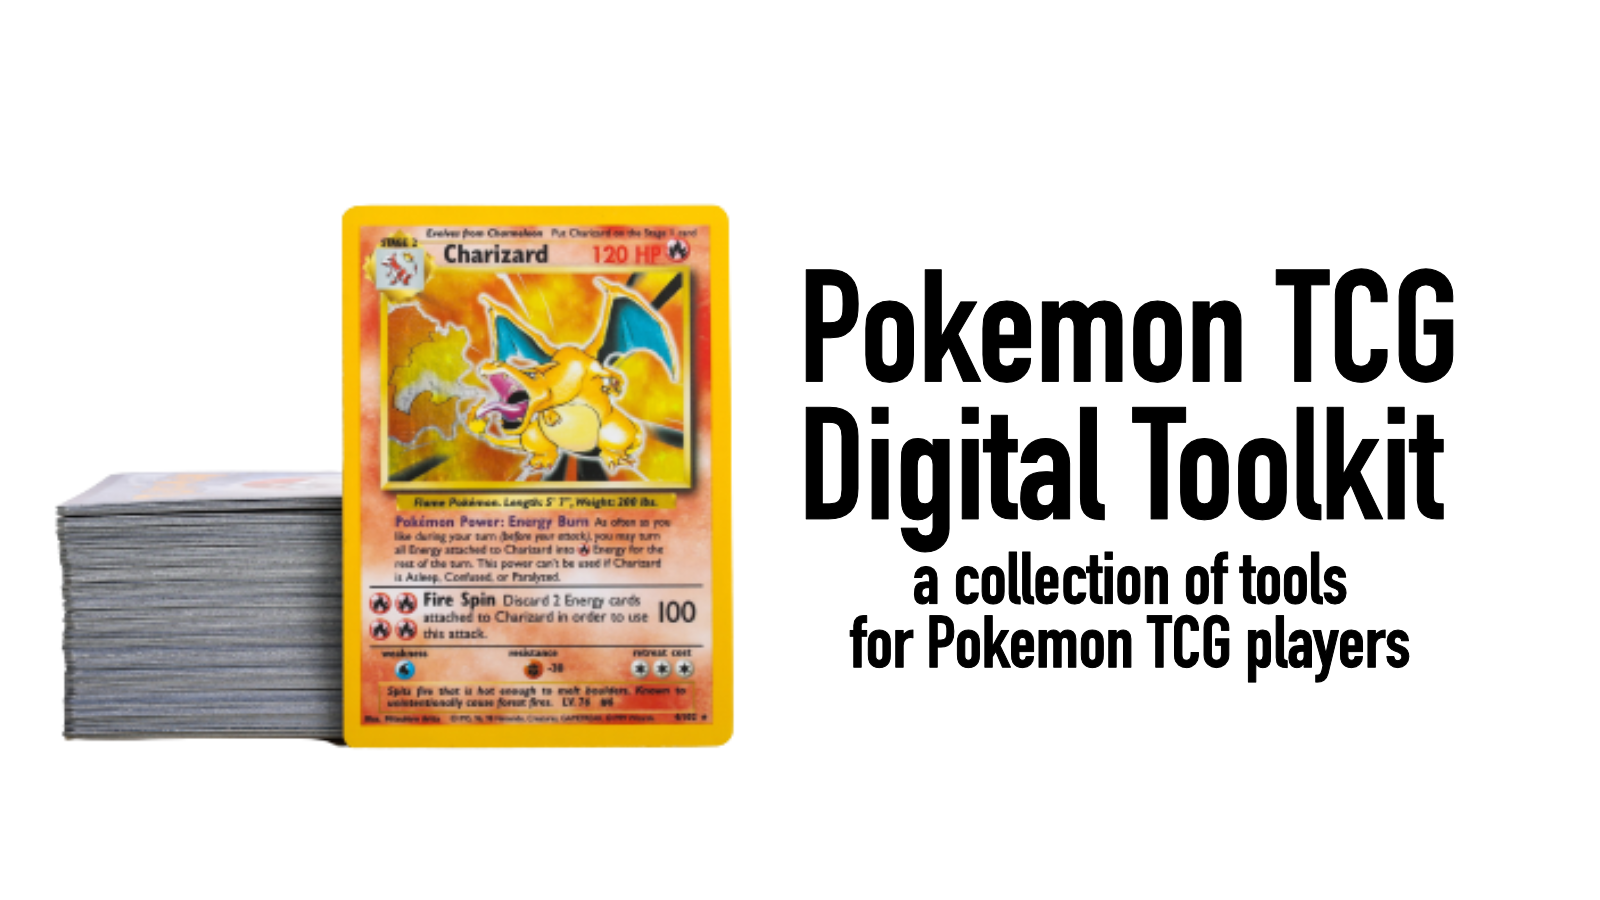 A Pokemon TCG deck, a Charizard card next to it and text 'Pokemon TCG Digital Toolkit, a collection of tools for Pokemon TCG players'